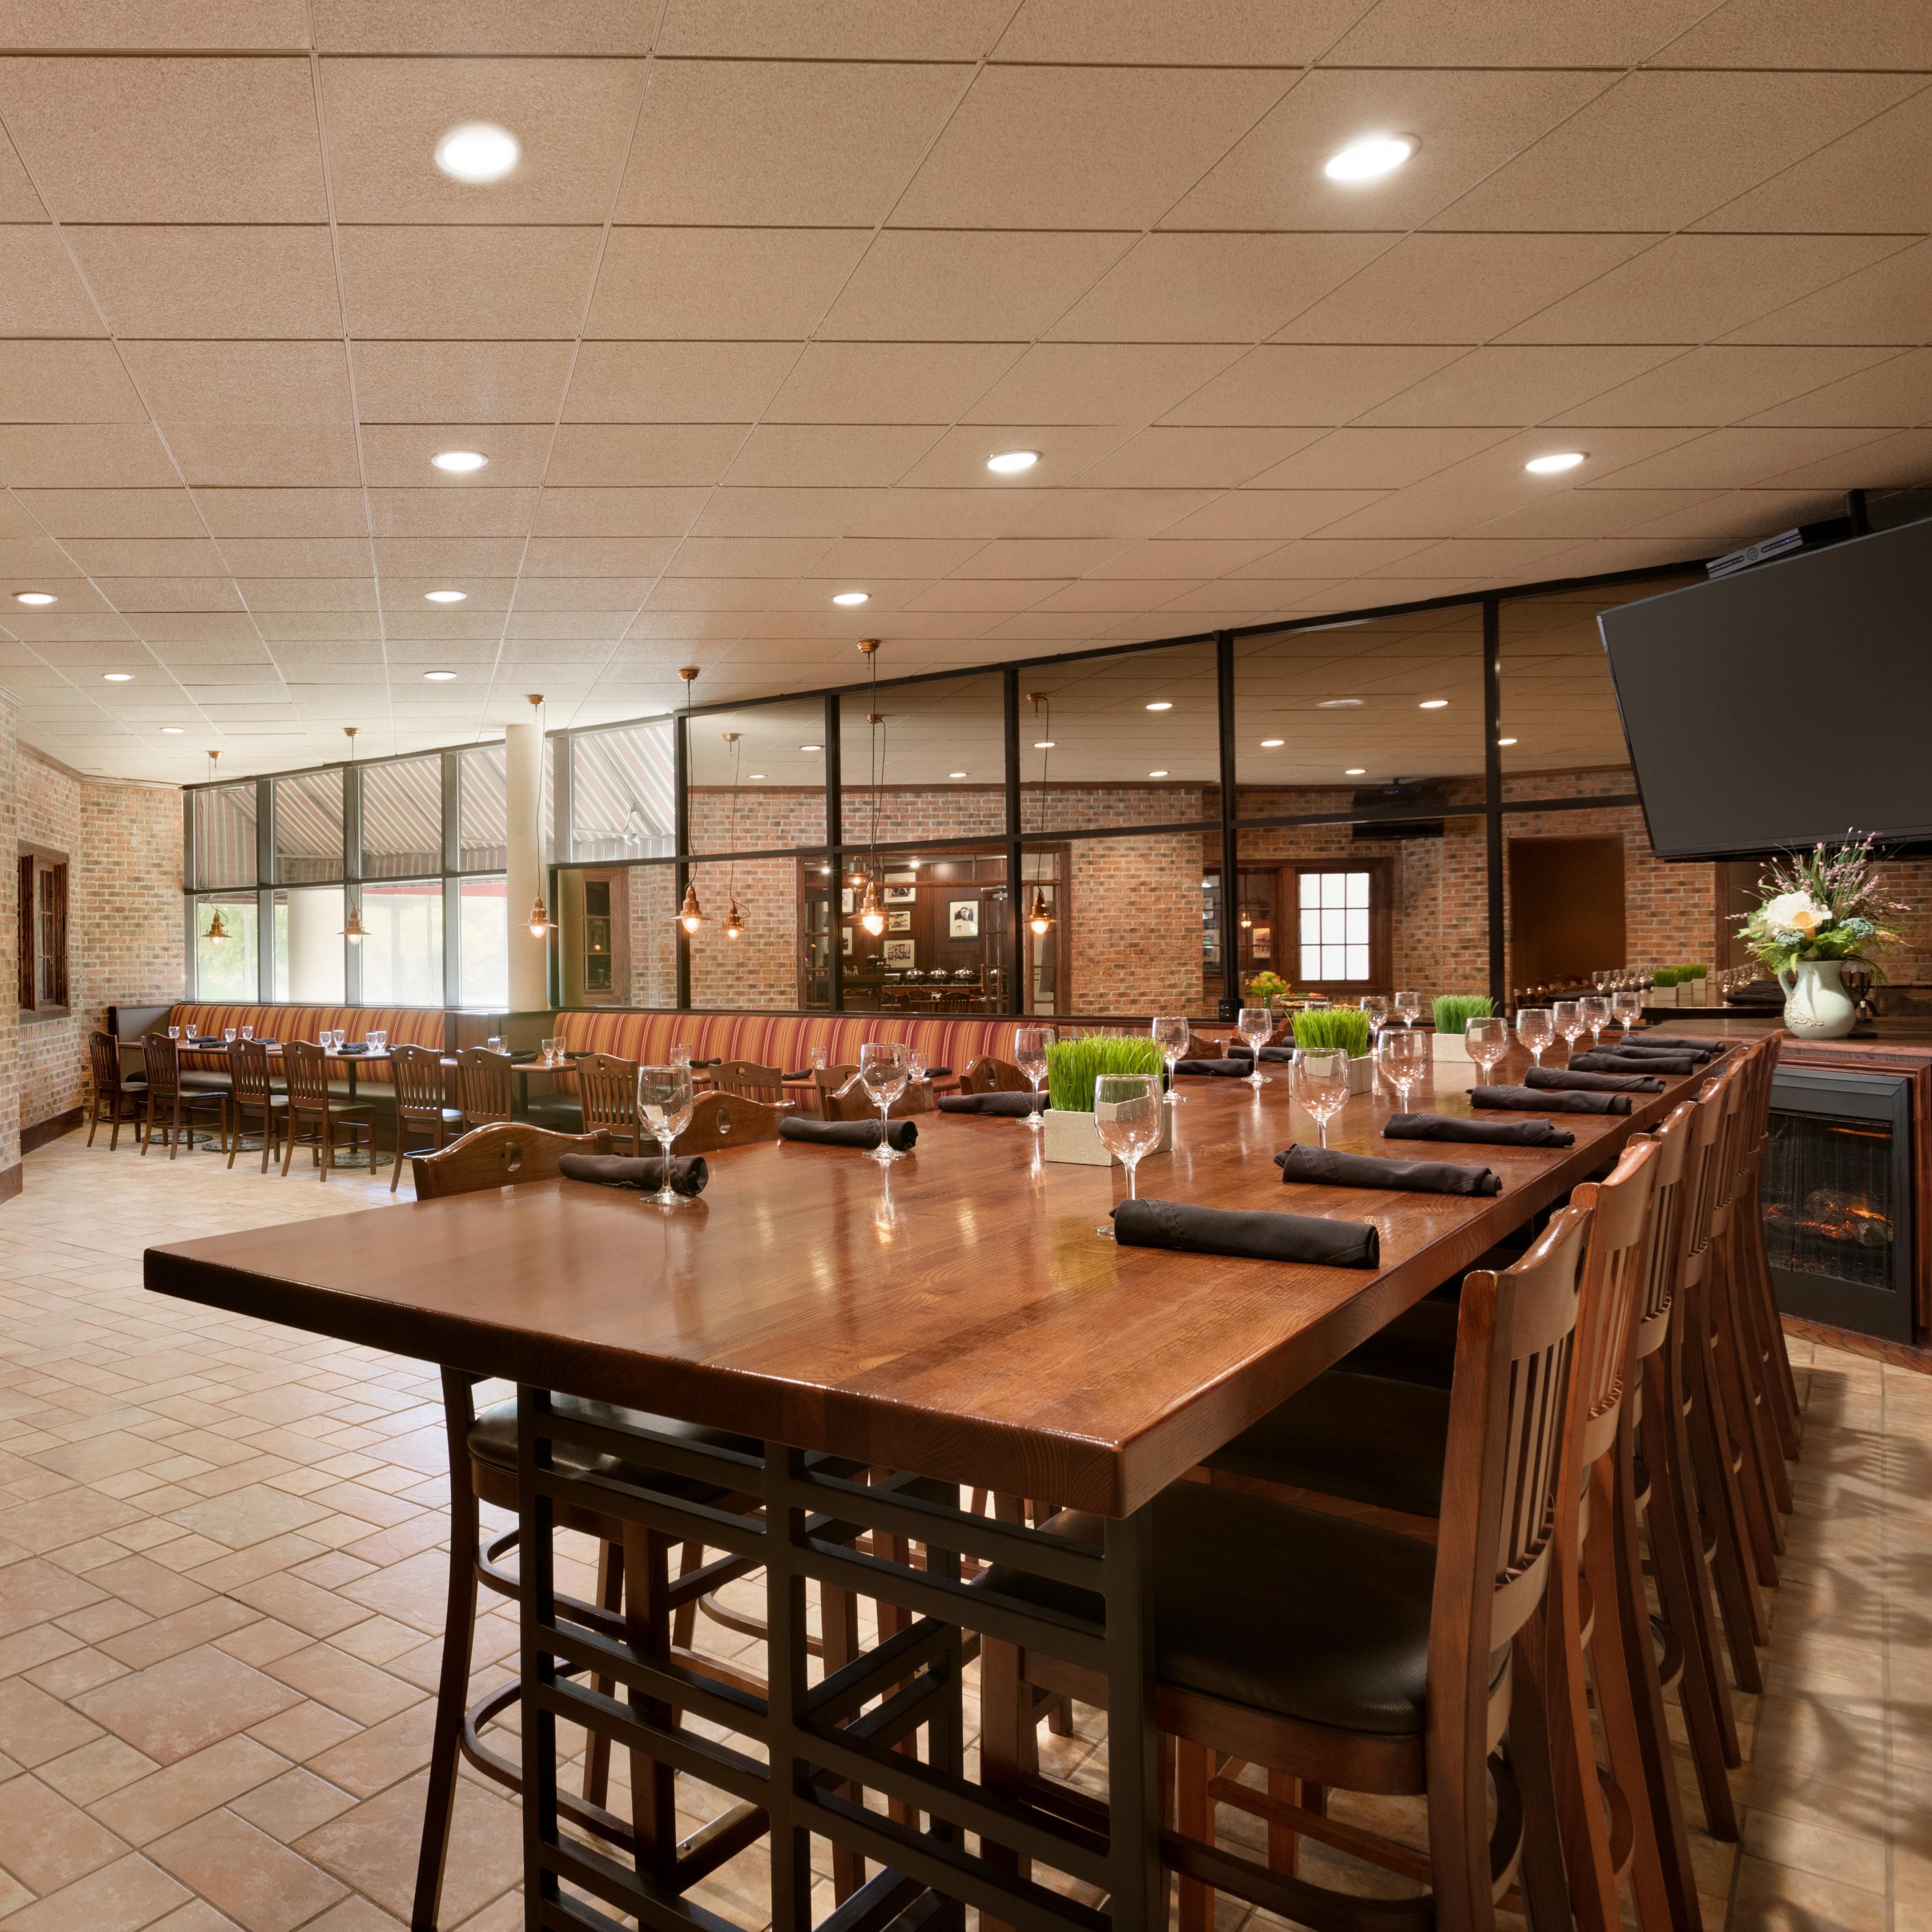 Our flexible private dining space can accommodate up to 60 guests.